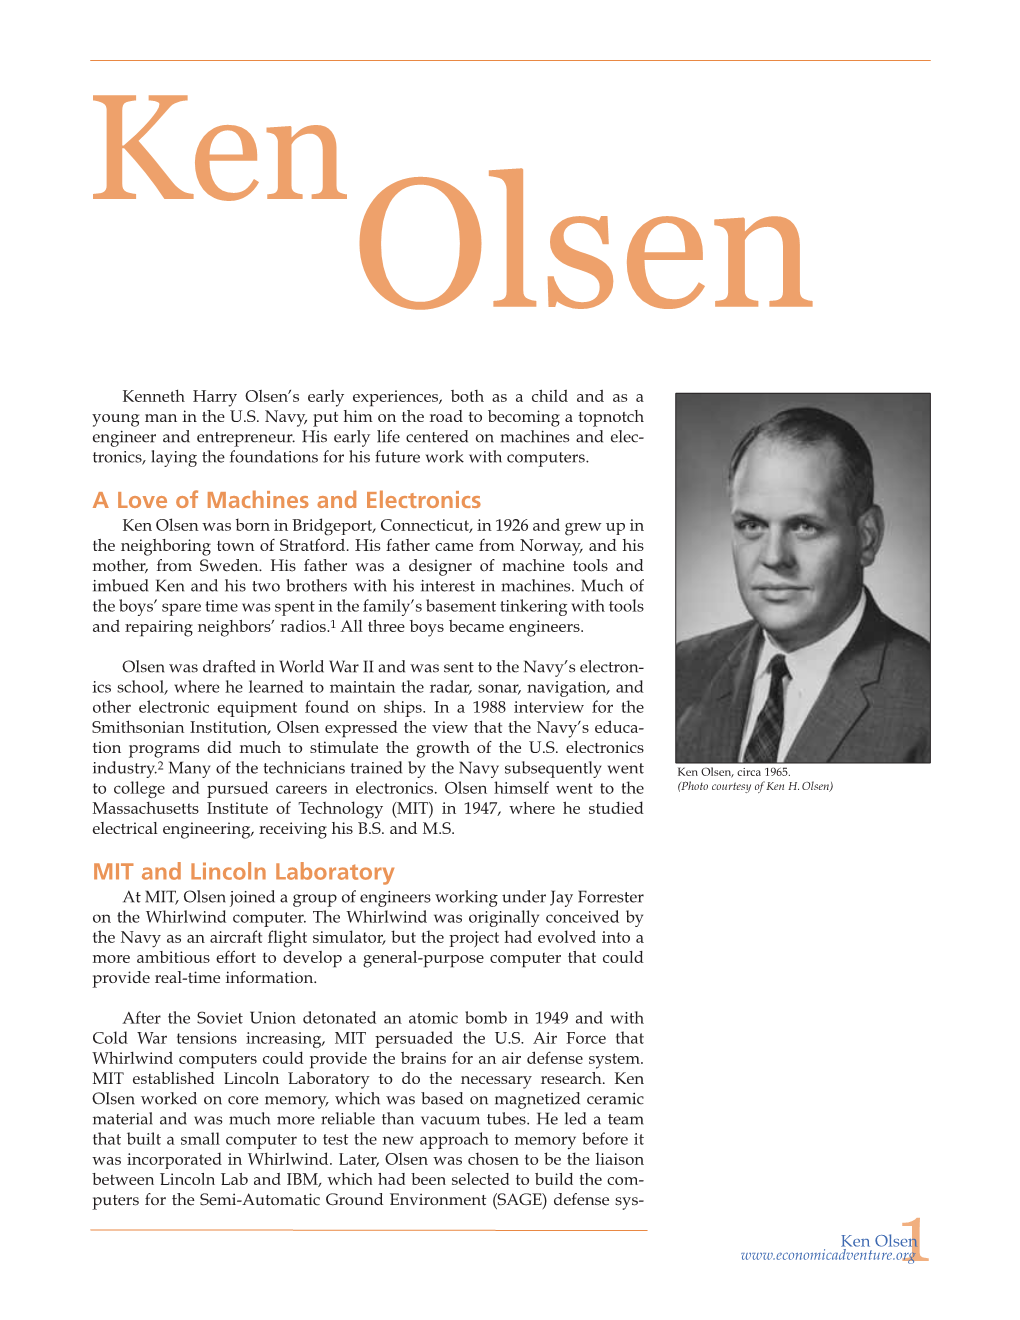 Ken Olsen Was Born in Bridgeport, Connecticut, in 1926 and Grew up in the Neighboring Town of Stratford